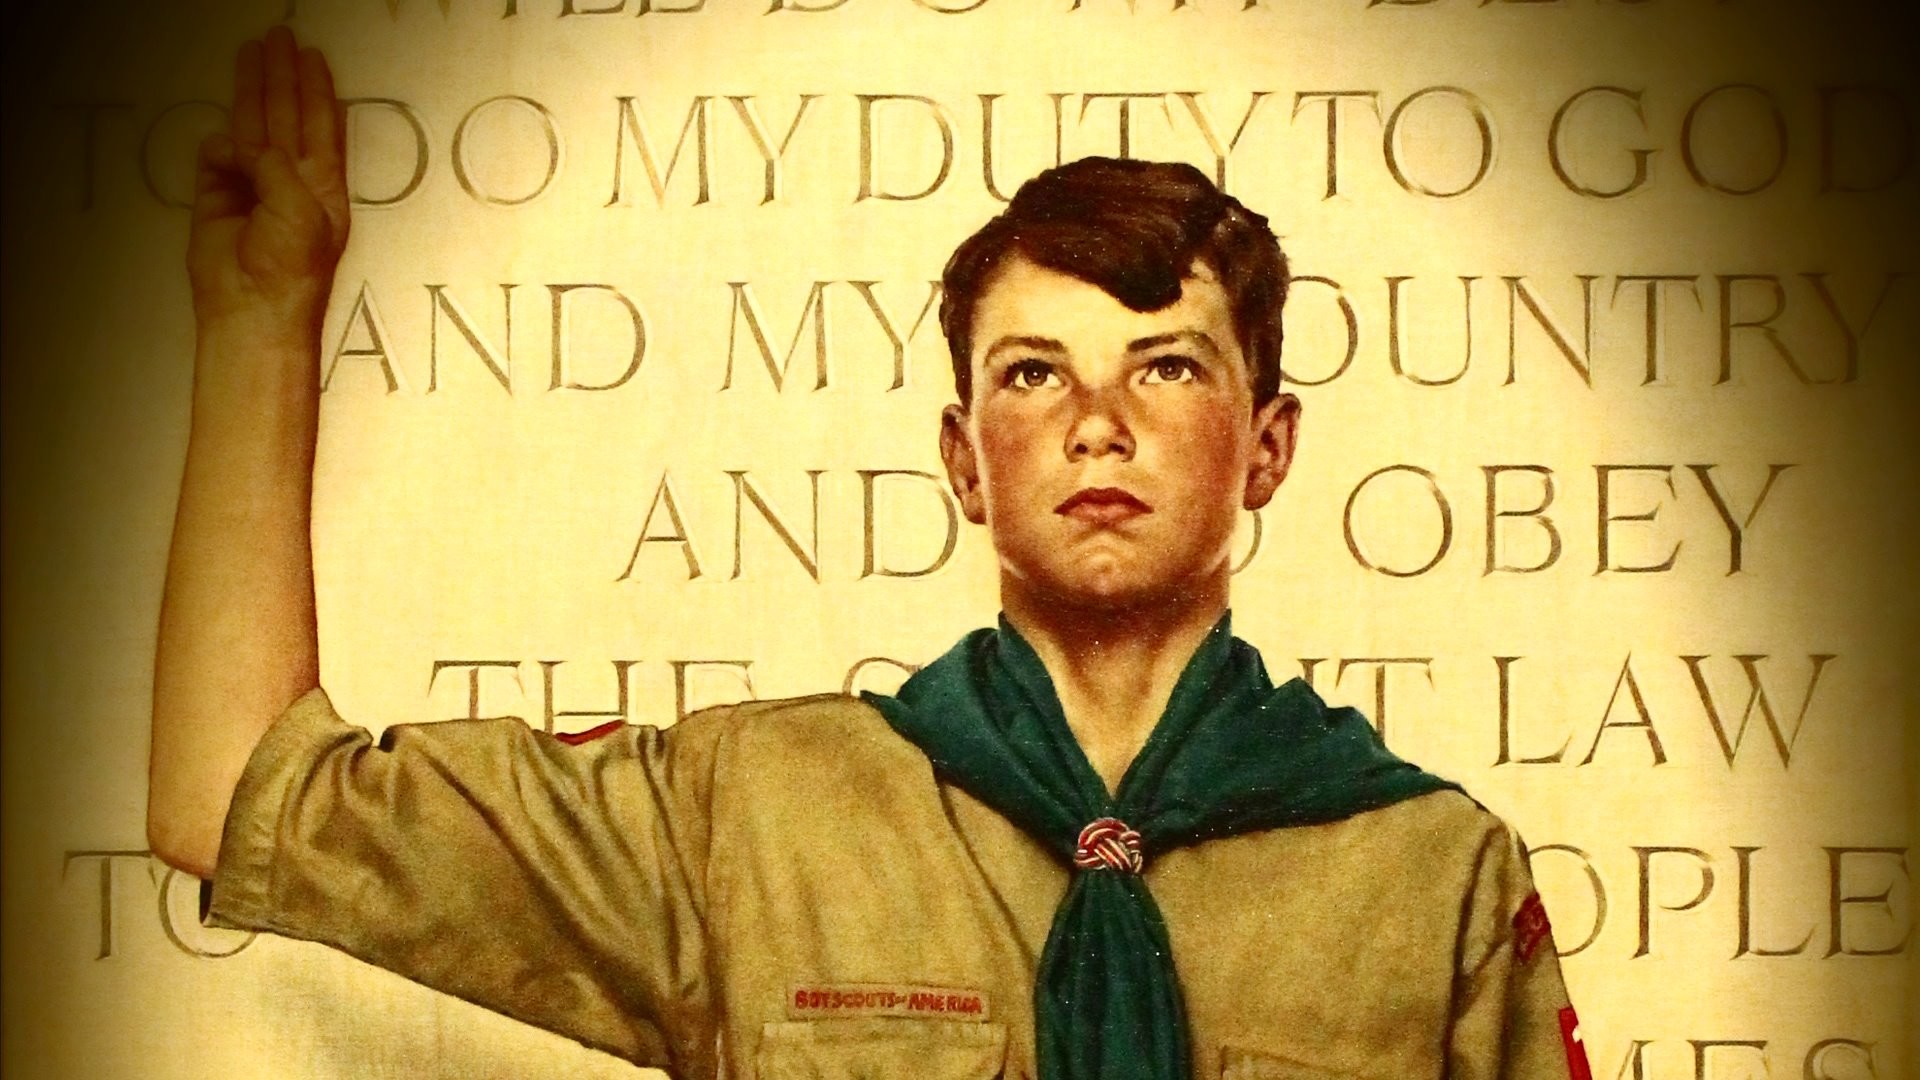 1920x1080 Norman Rockwell Boy Scout Paintings wallpaper